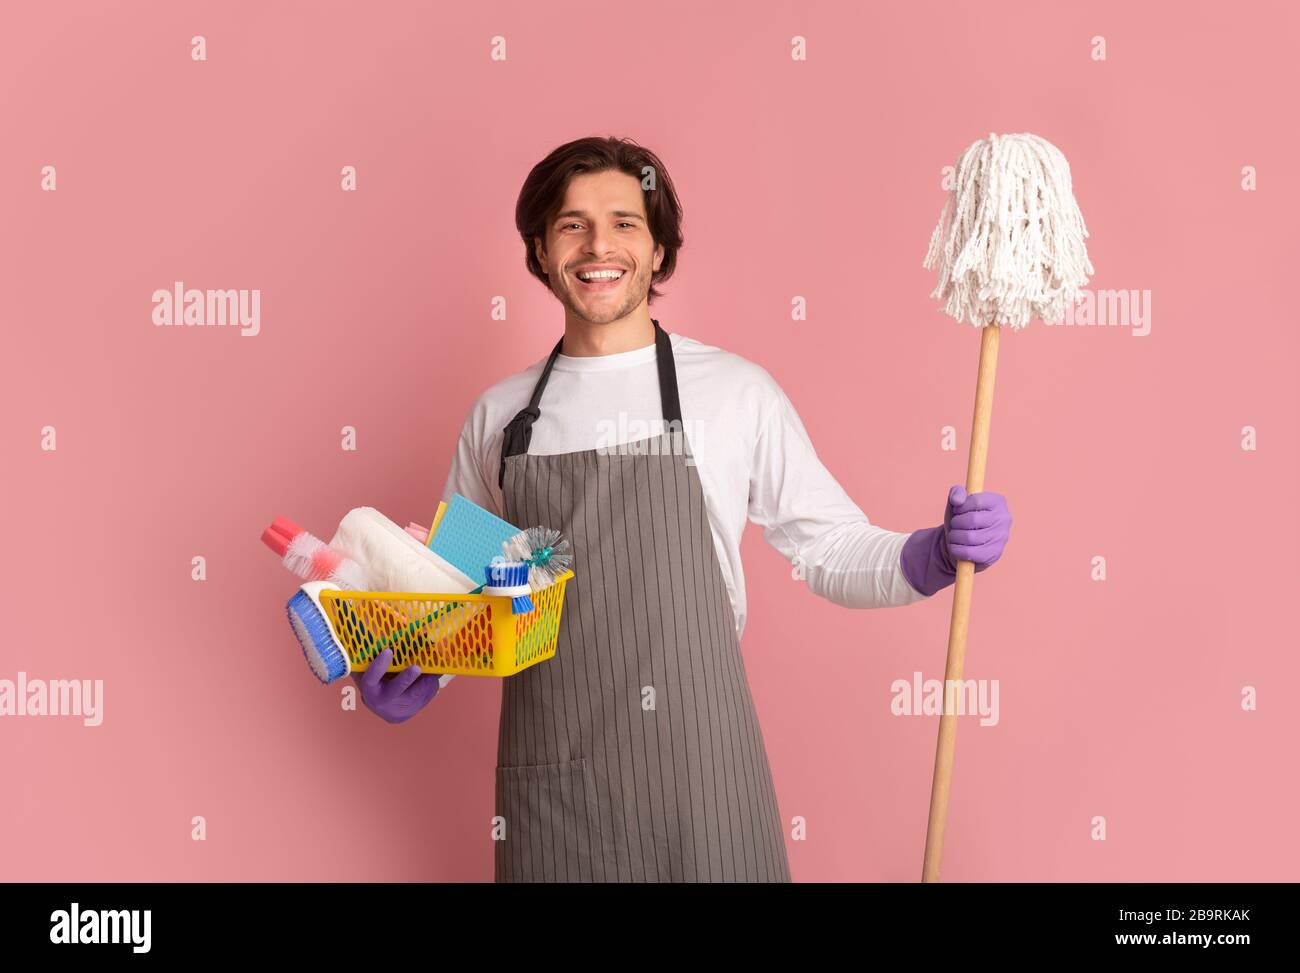 Millennial Man Posing With Mop And Cleaning Supplies Over Pink Background Stock Photo